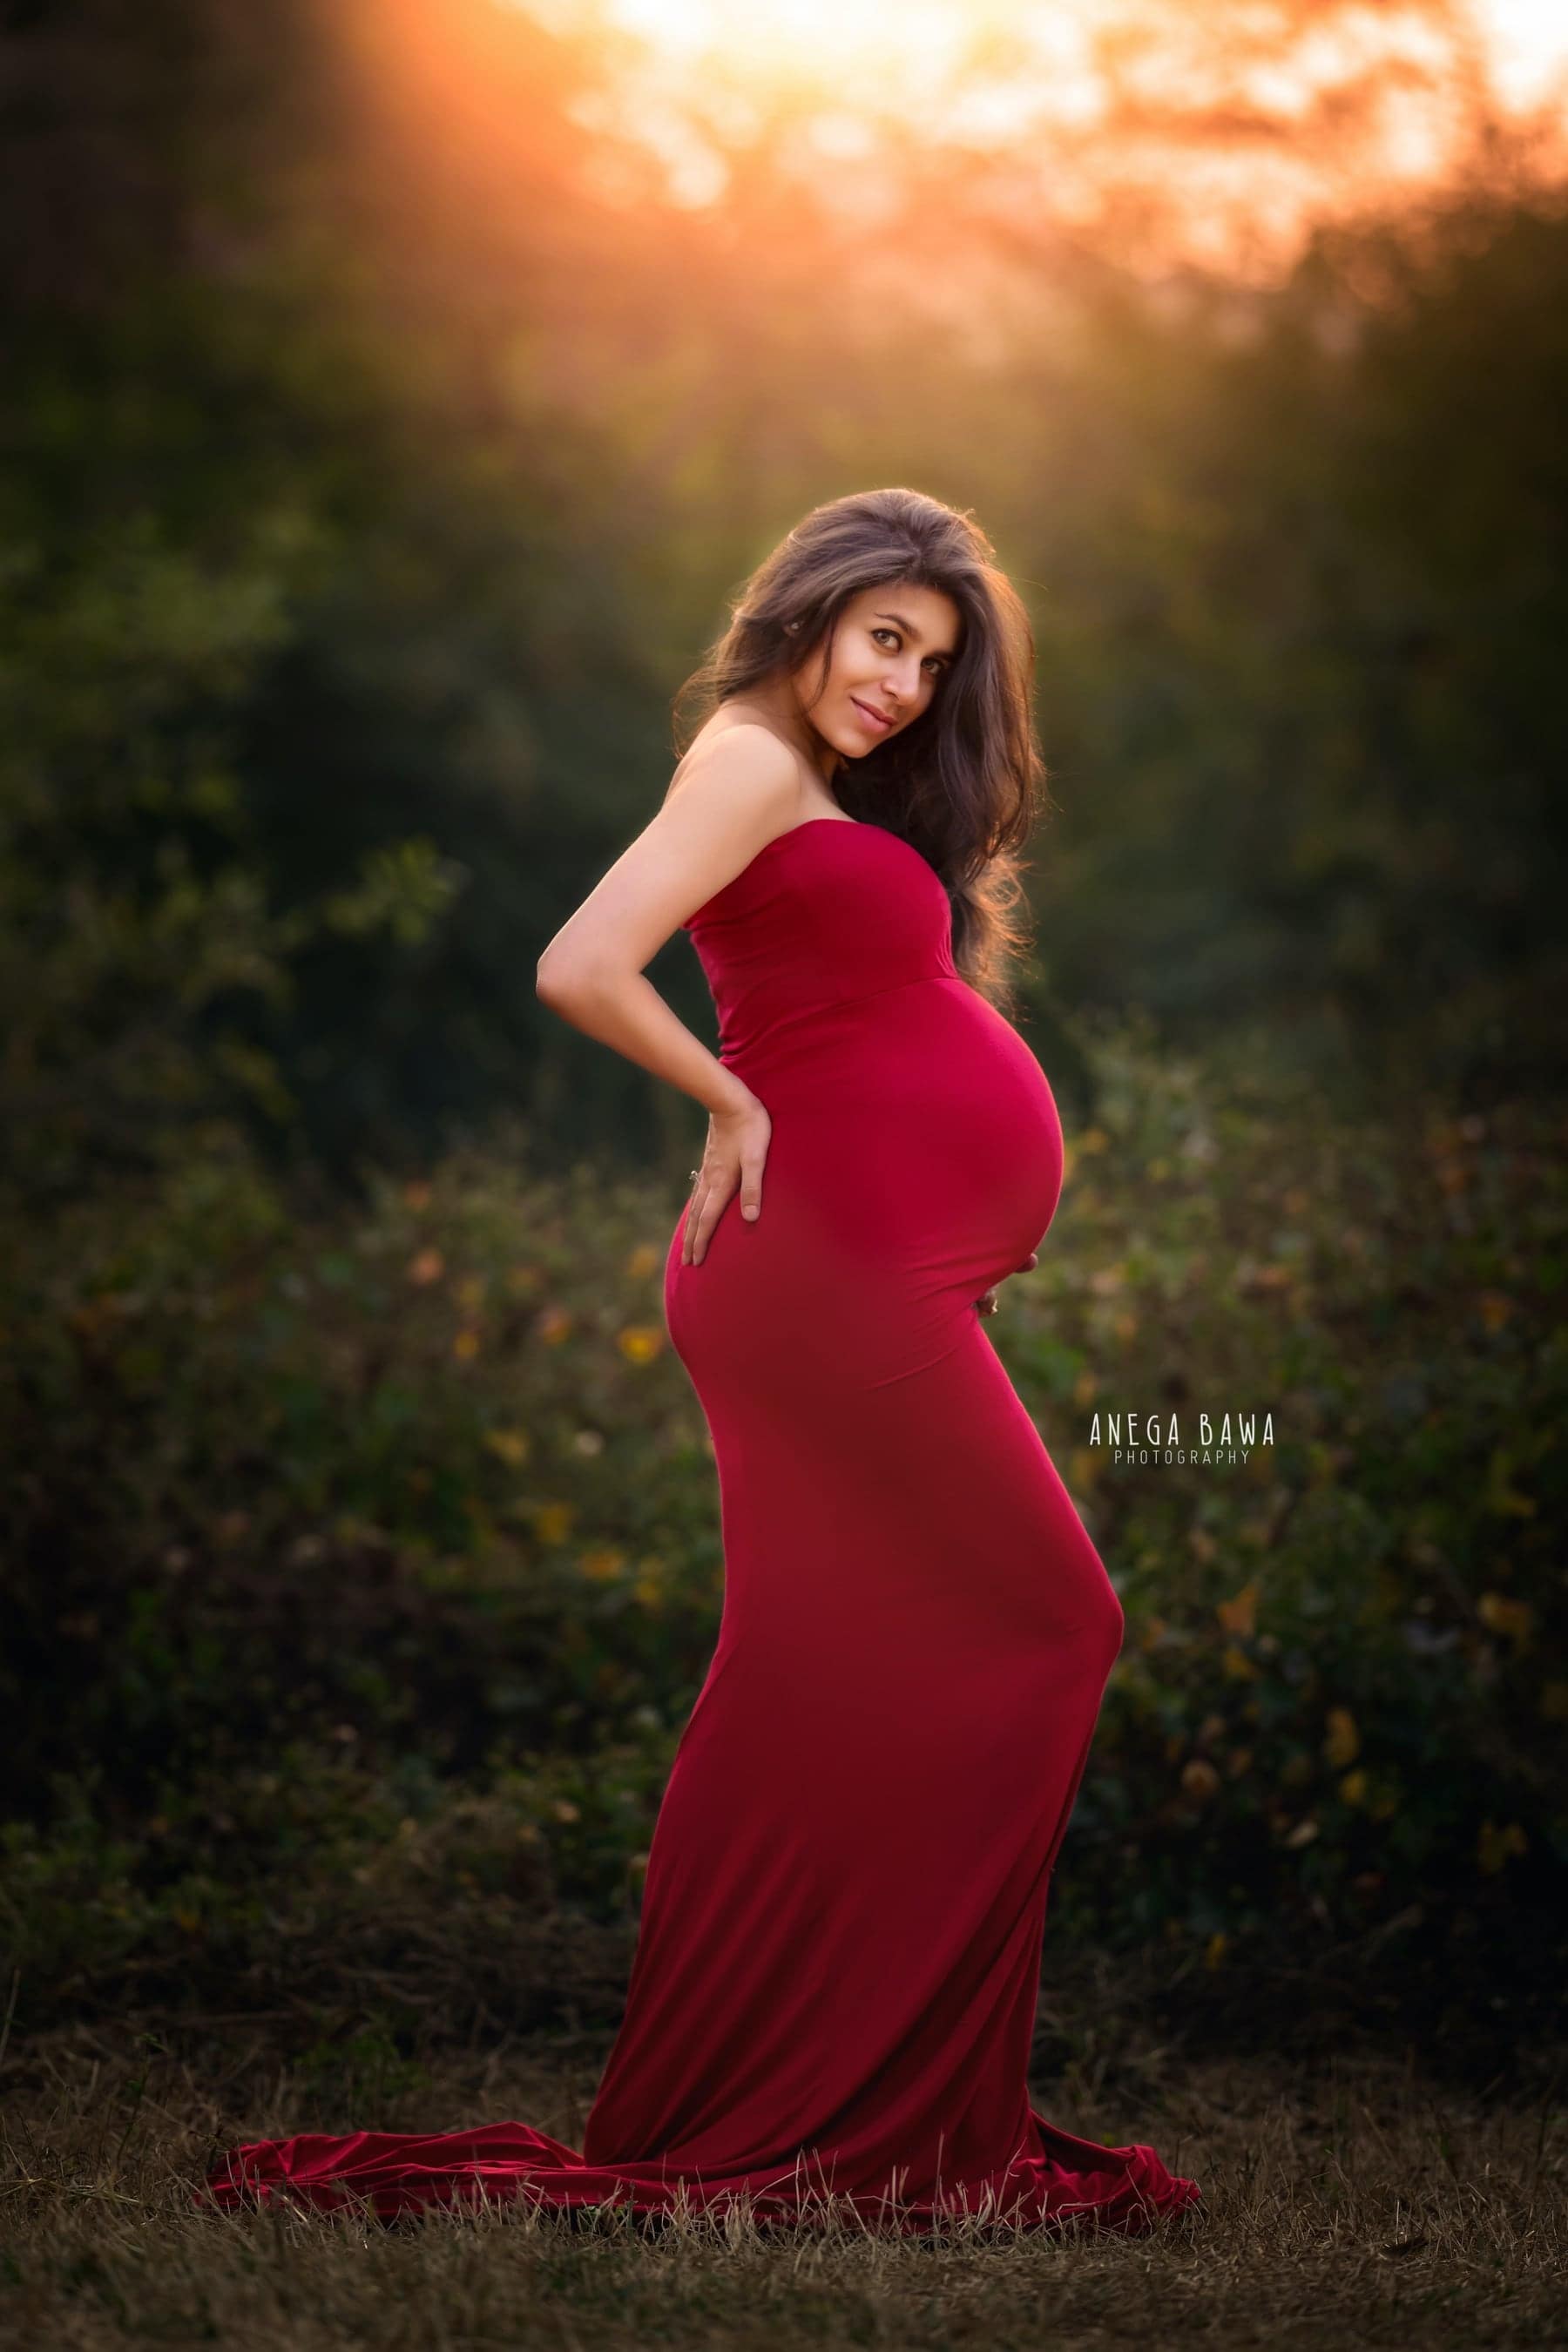 Outdoor Maternity Photography In Delhi By Anega Bawa 